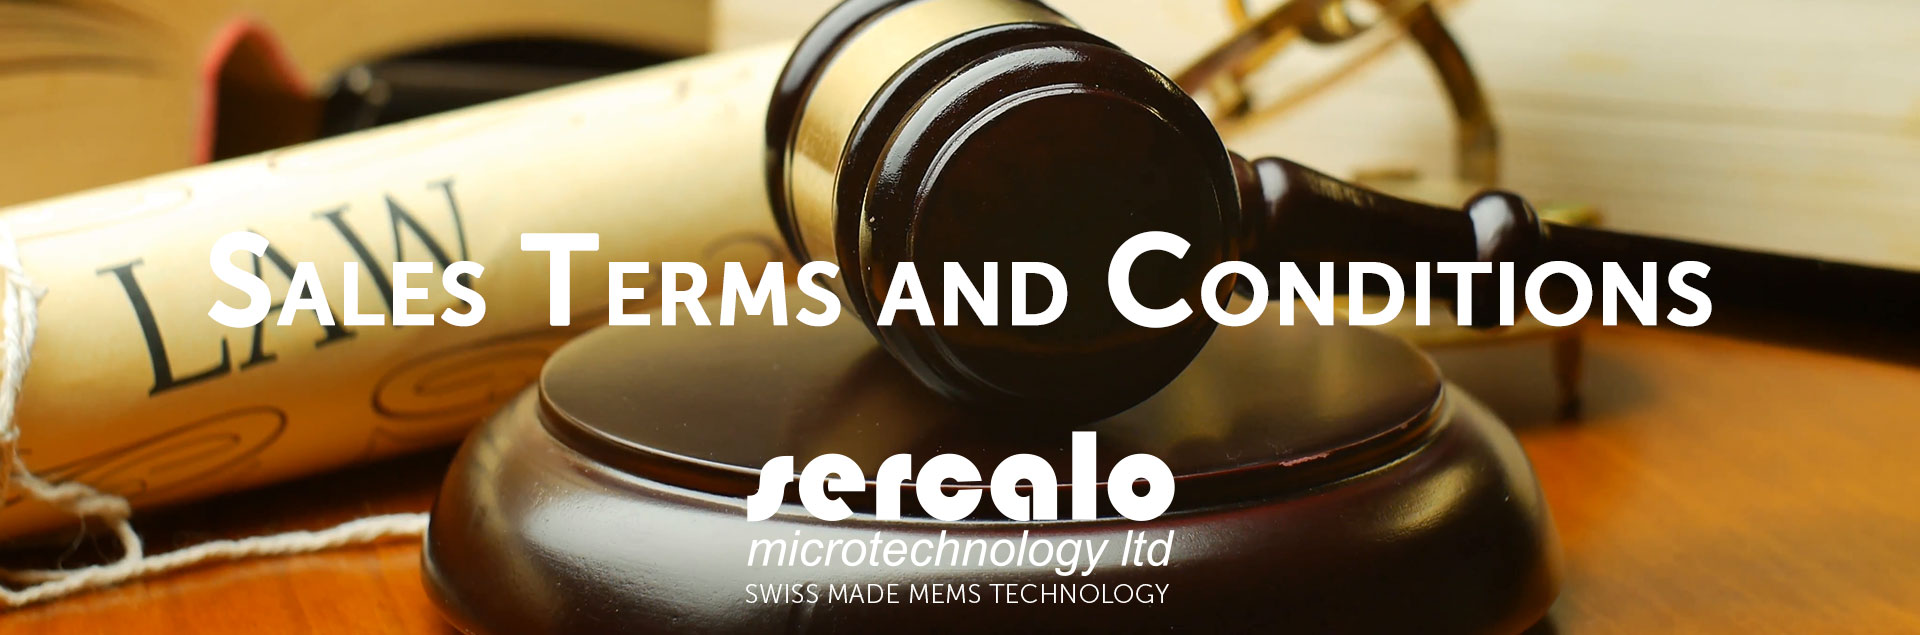 Sales Terms and conditions work with Sercalo Microtechnology Ltd.